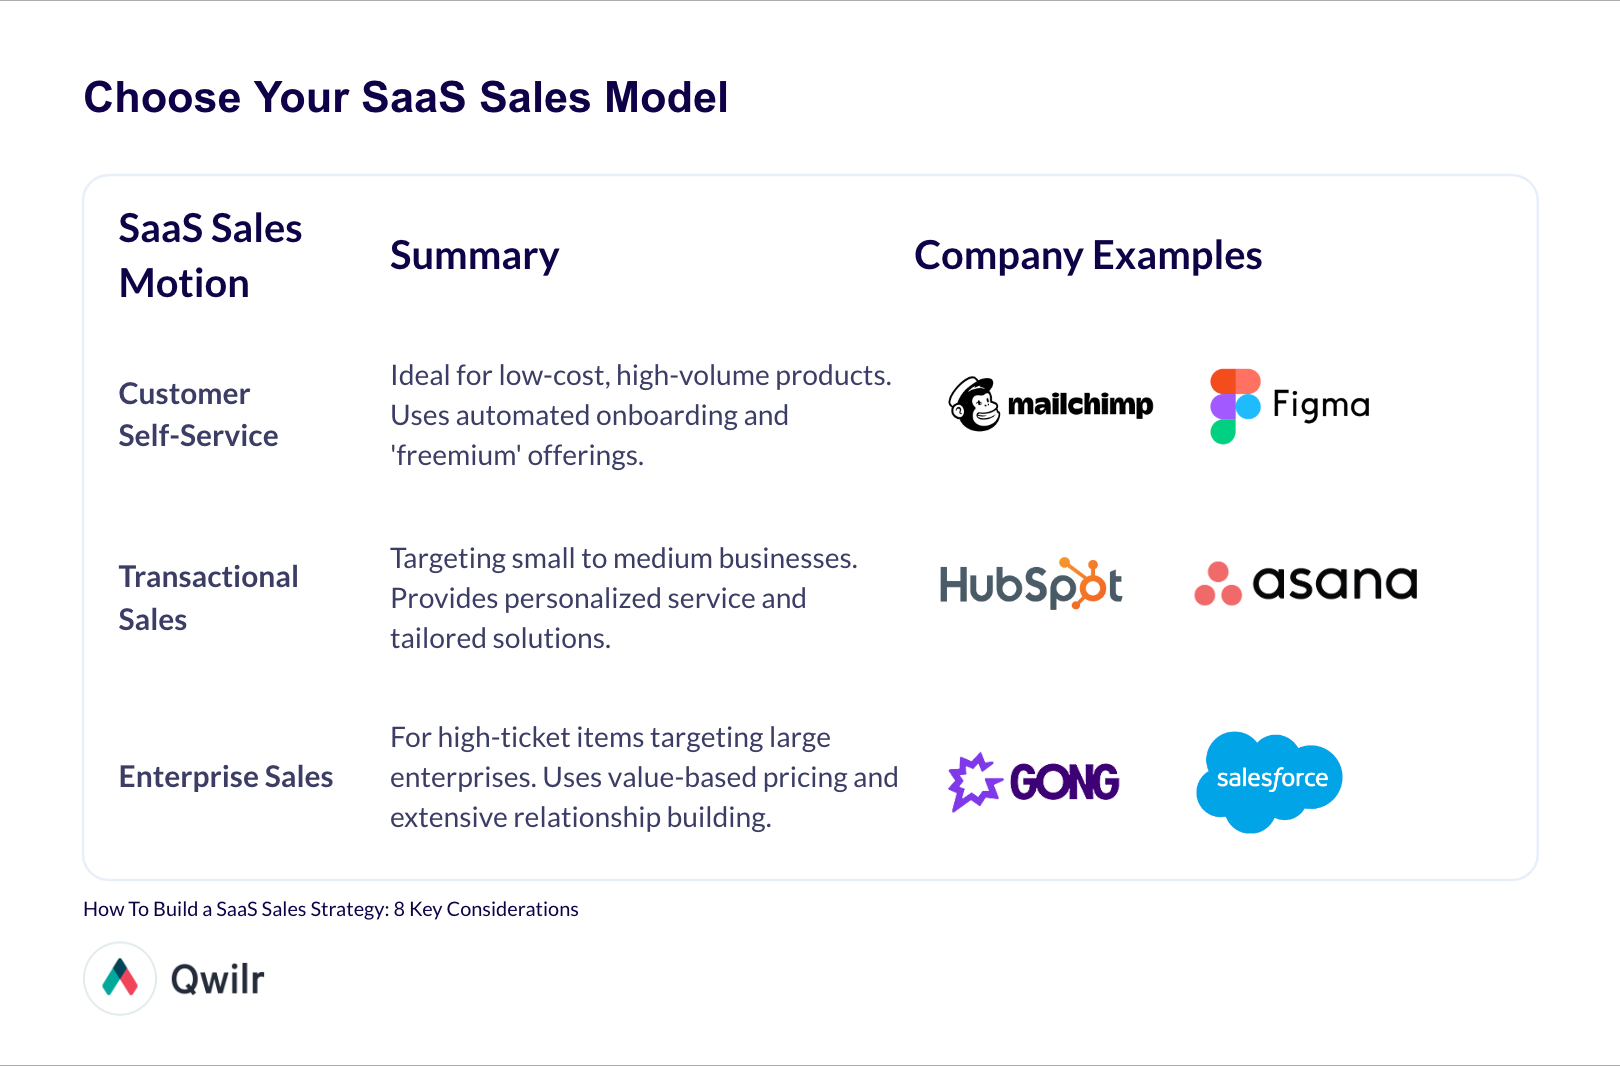 A table summarizing the above content. The 3 sales models are customer self-service, transactional saas & enterprise sales